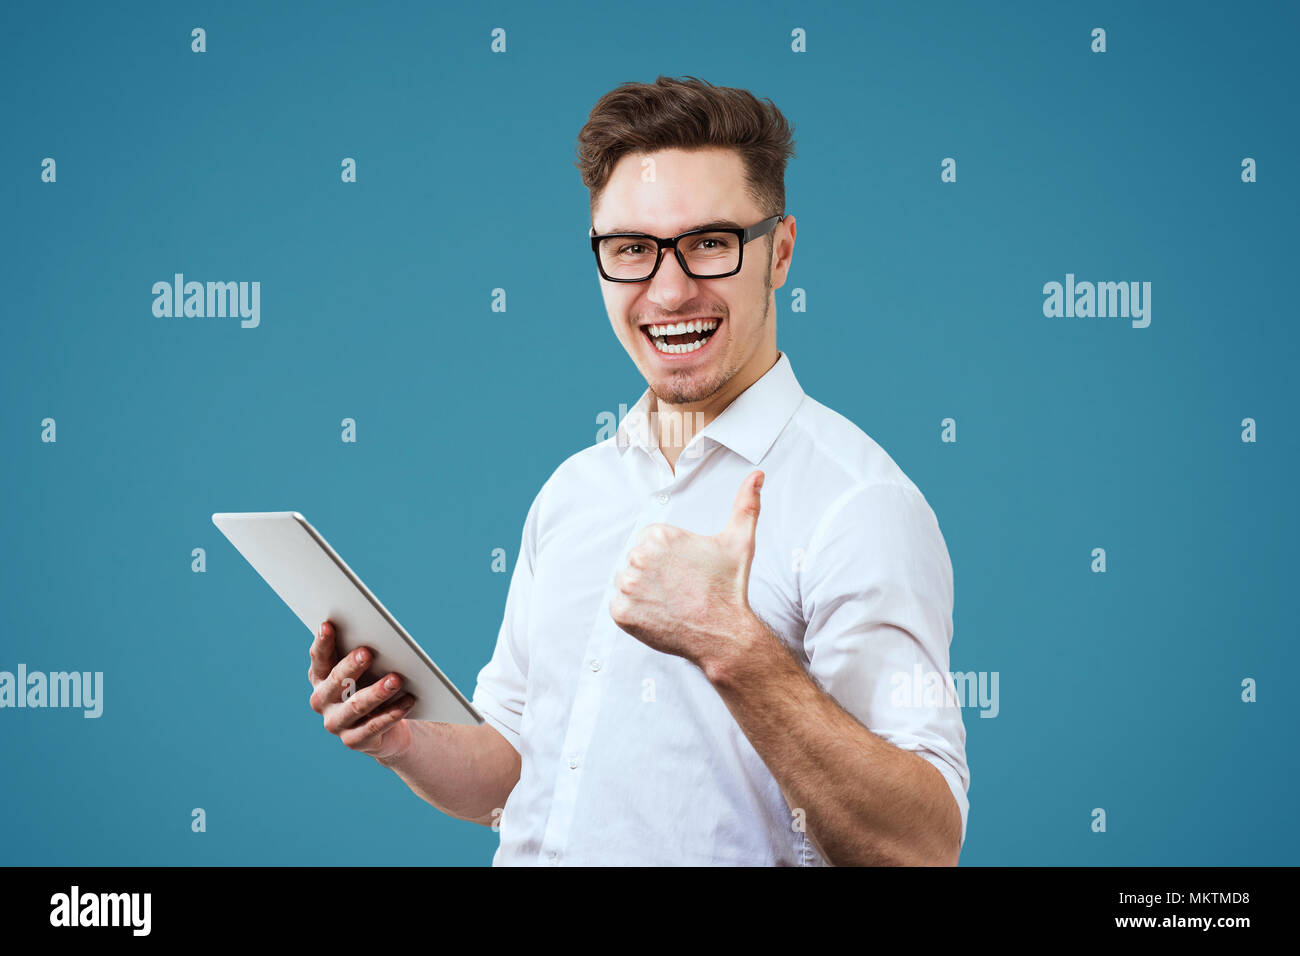 Excited young man wearing white shirt and glasses using tablet pc giving thumbs up gesture isolated on blue background Stock Photo